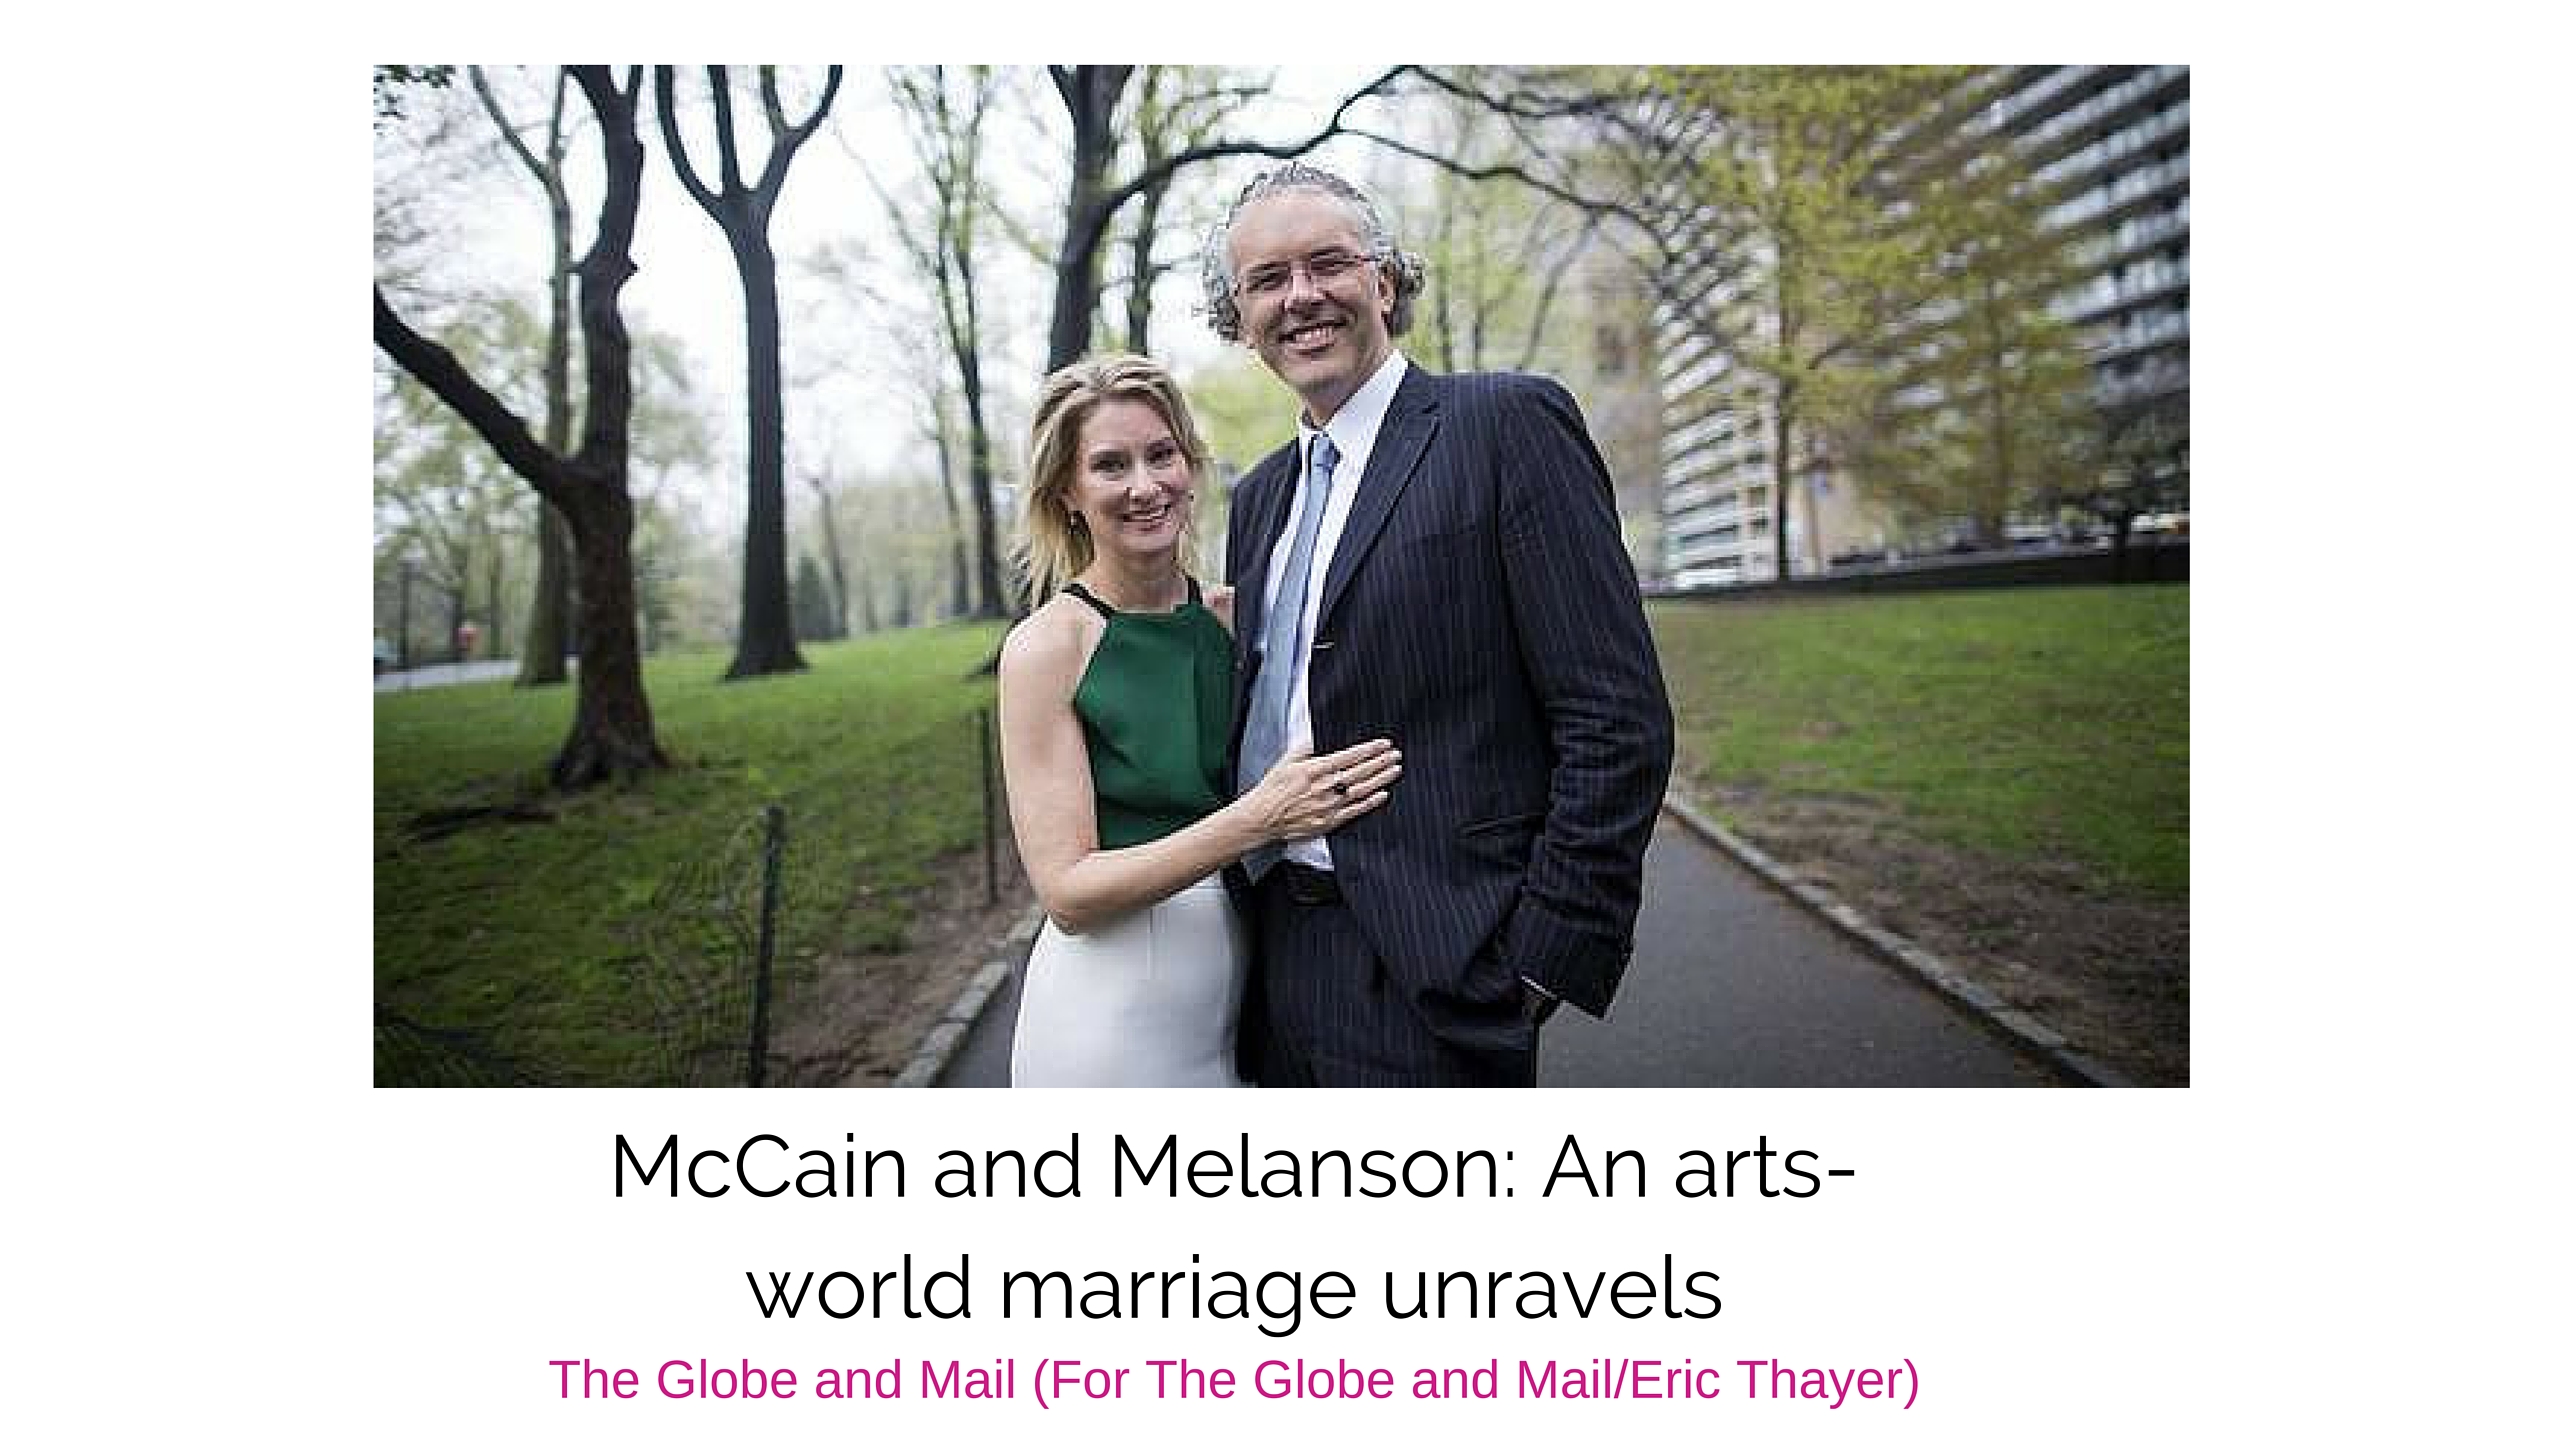 After a whirlwind romance, Jeff Melanson and Eleanor McCain wed in April, 2014, shortly before they were photographed in New York. (For The Globe and Mail/Eric Thayer)